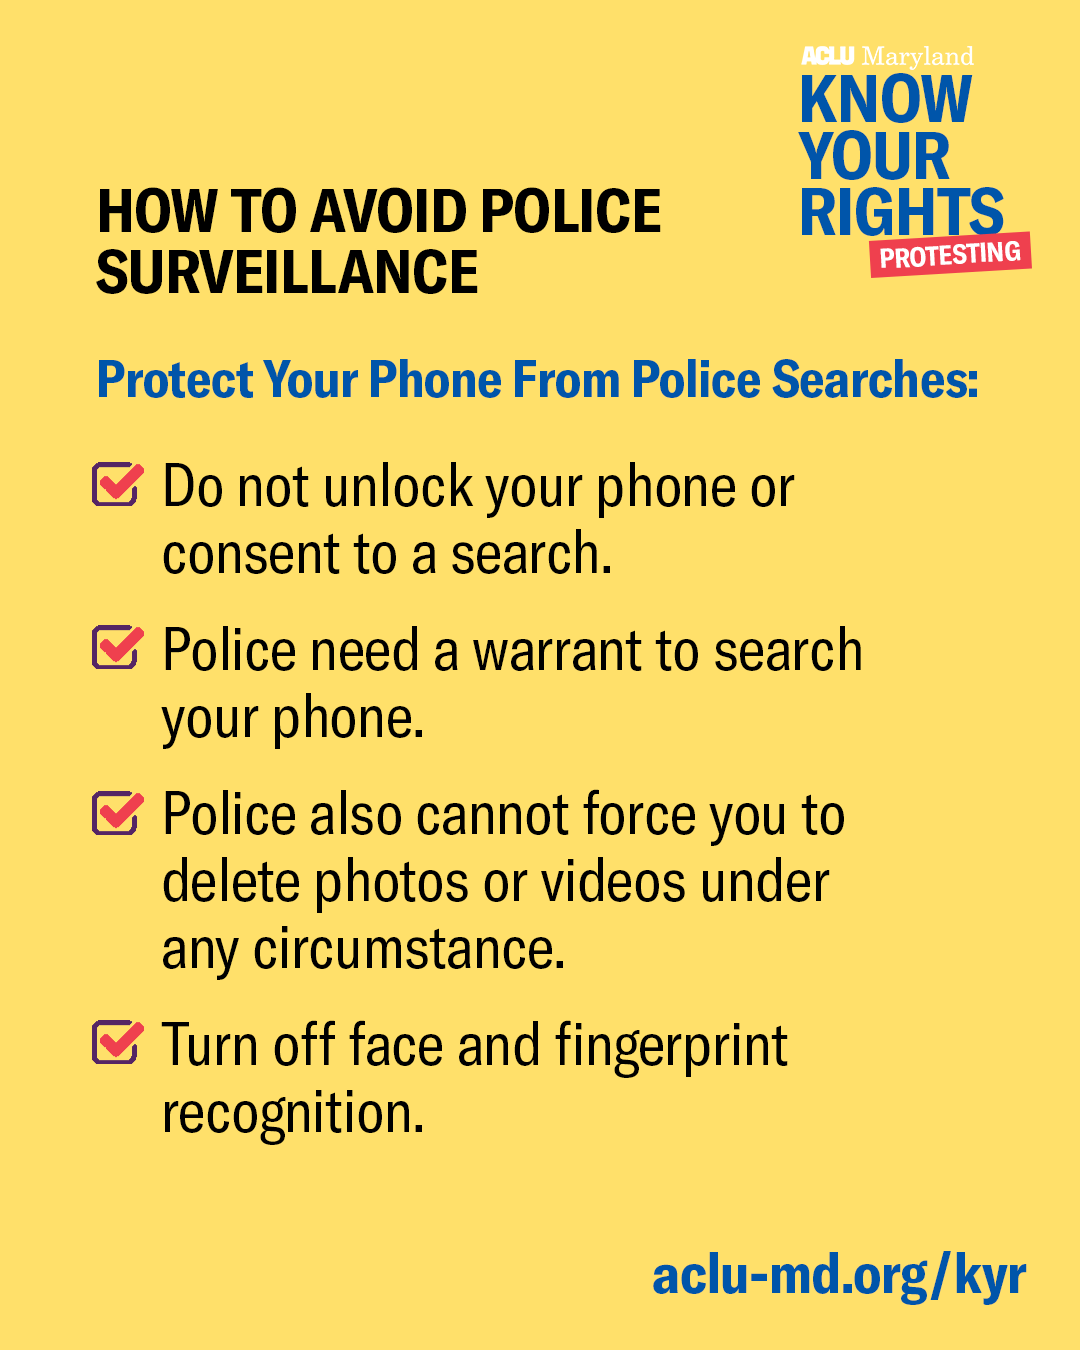 How to avoid police surveillance - Protect Your Phone From Police Searches.